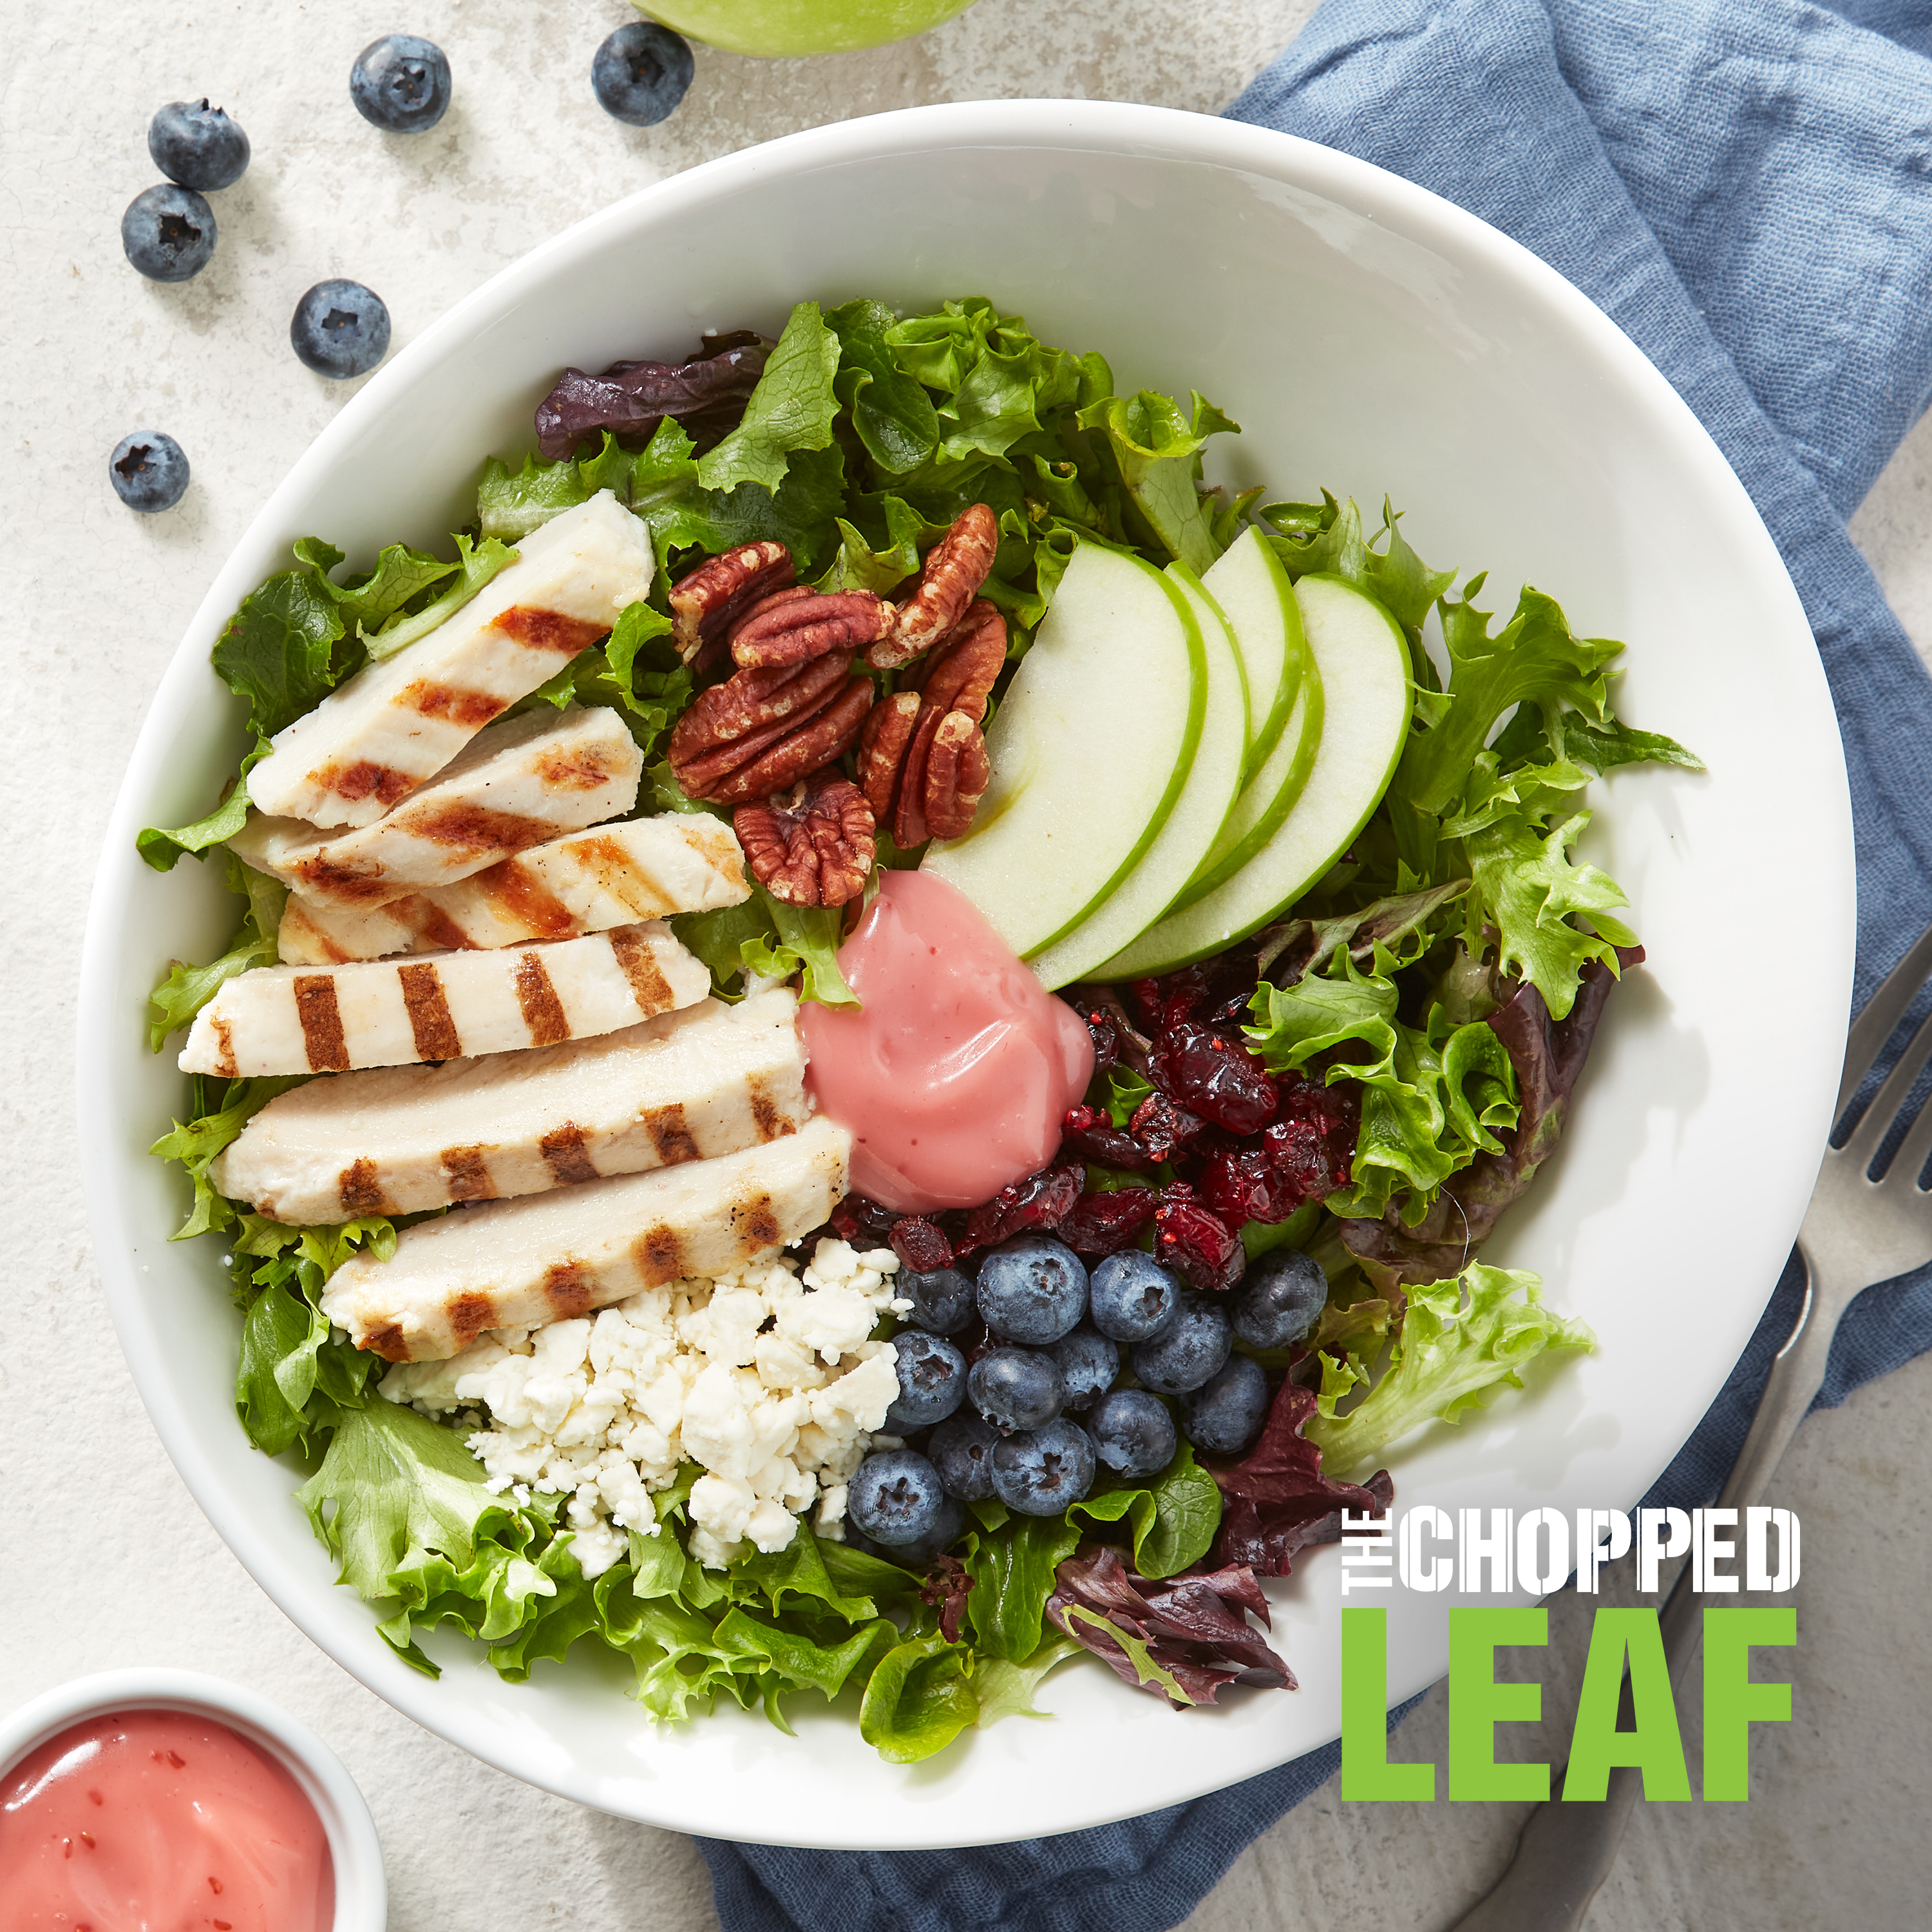 Enjoy The Chopped Leaf's Berry Breeze Salad - bursting with berries - a quintessential symbol of health, wellness and wholesome living. Available for a limited time.